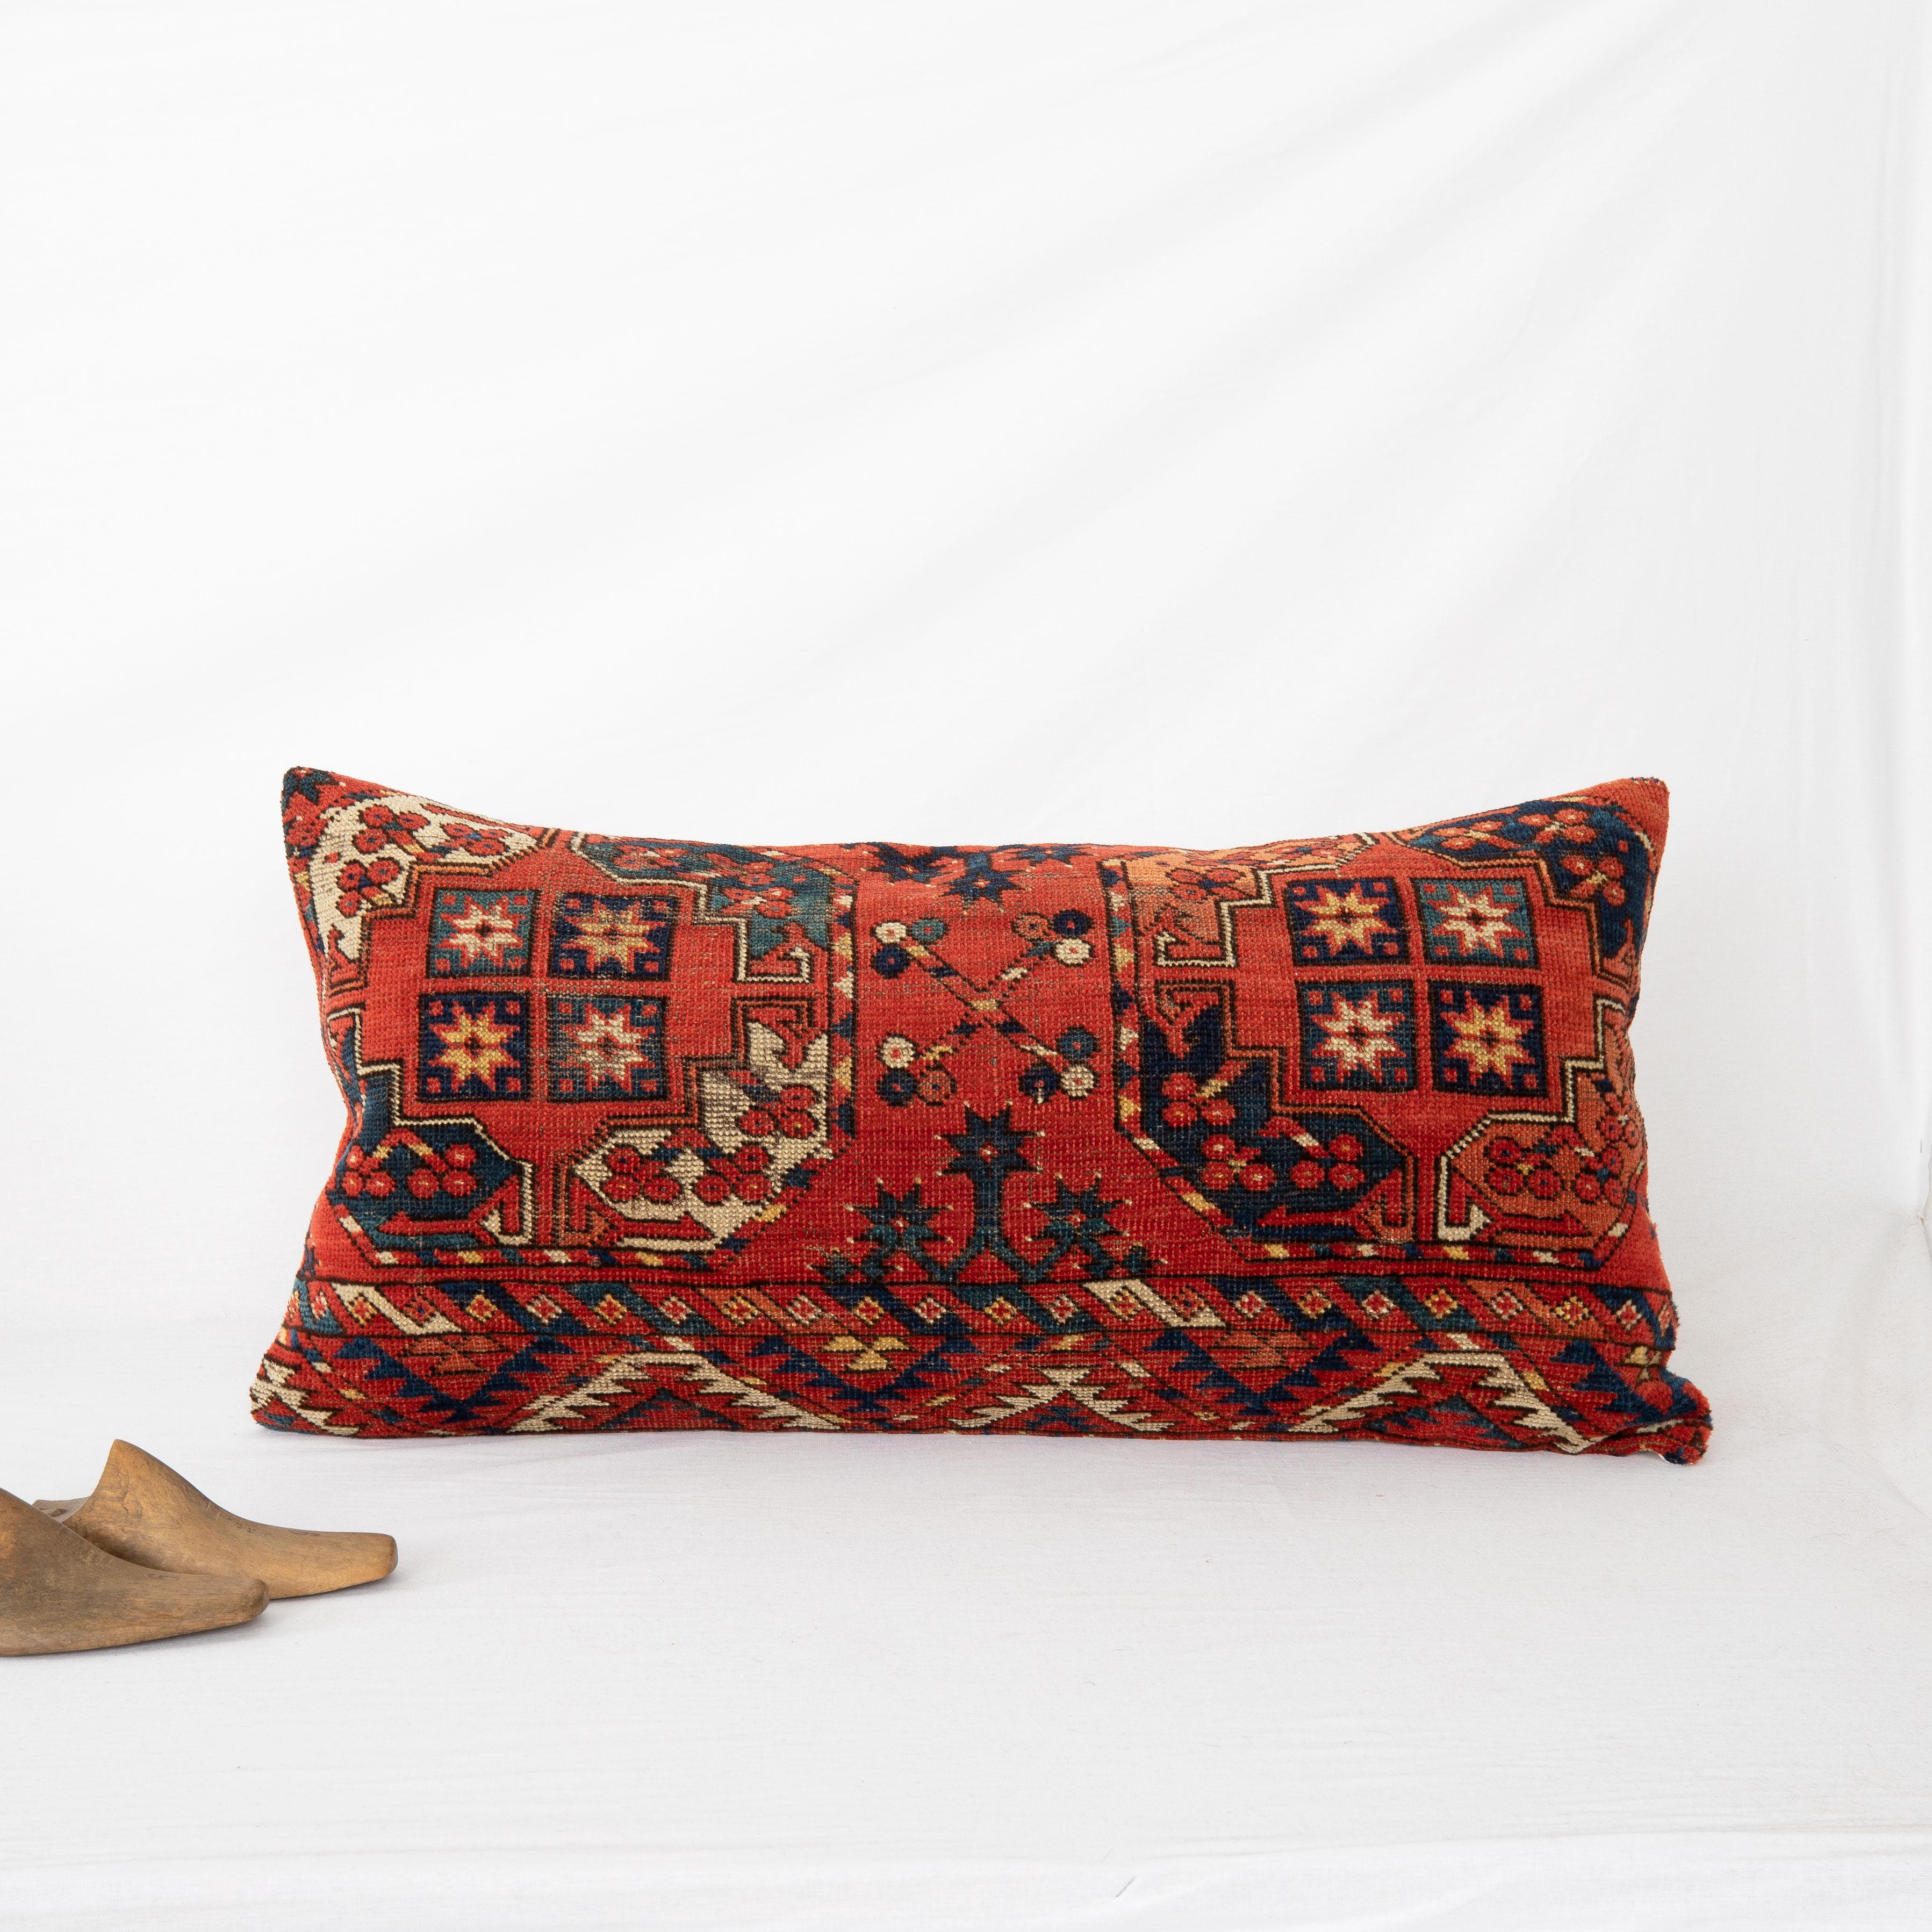 Tribal Antique Rug Pillowcase Made from a Mid-19th C. Turkmen Ersari Rug Fragment For Sale